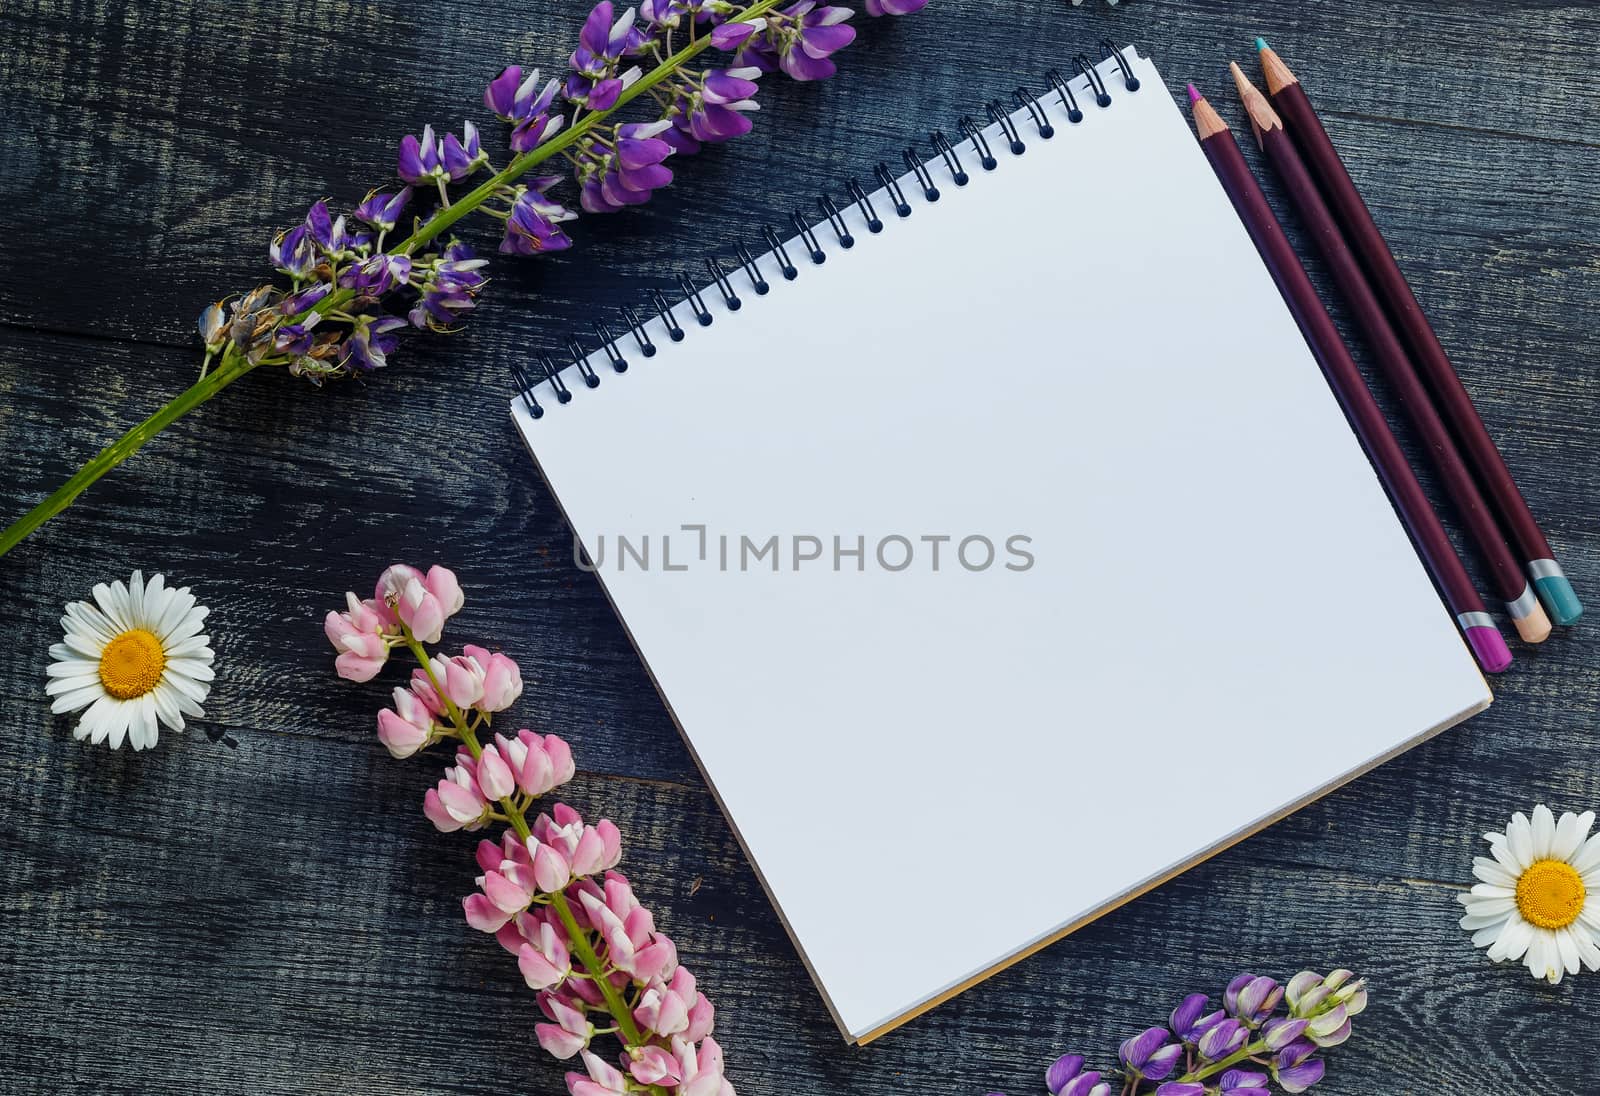 Still life, art, office supplies or education concept : Top view image of open notebook with blank pages on wooden background, ready for adding or mock up